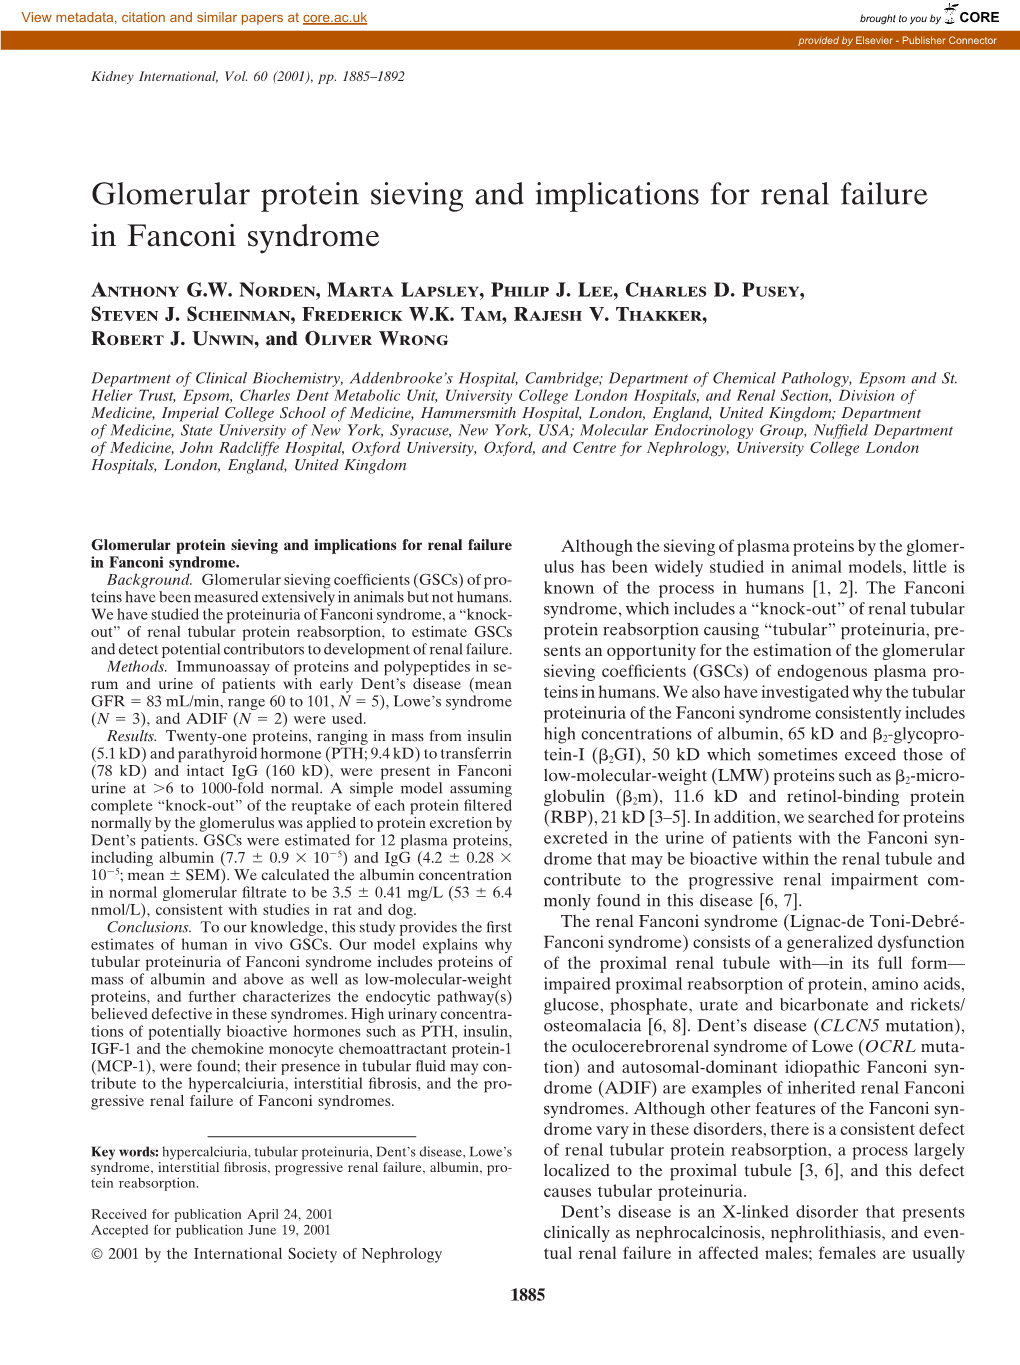 Glomerular Protein Sieving and Implications for Renal Failure in Fanconi Syndrome